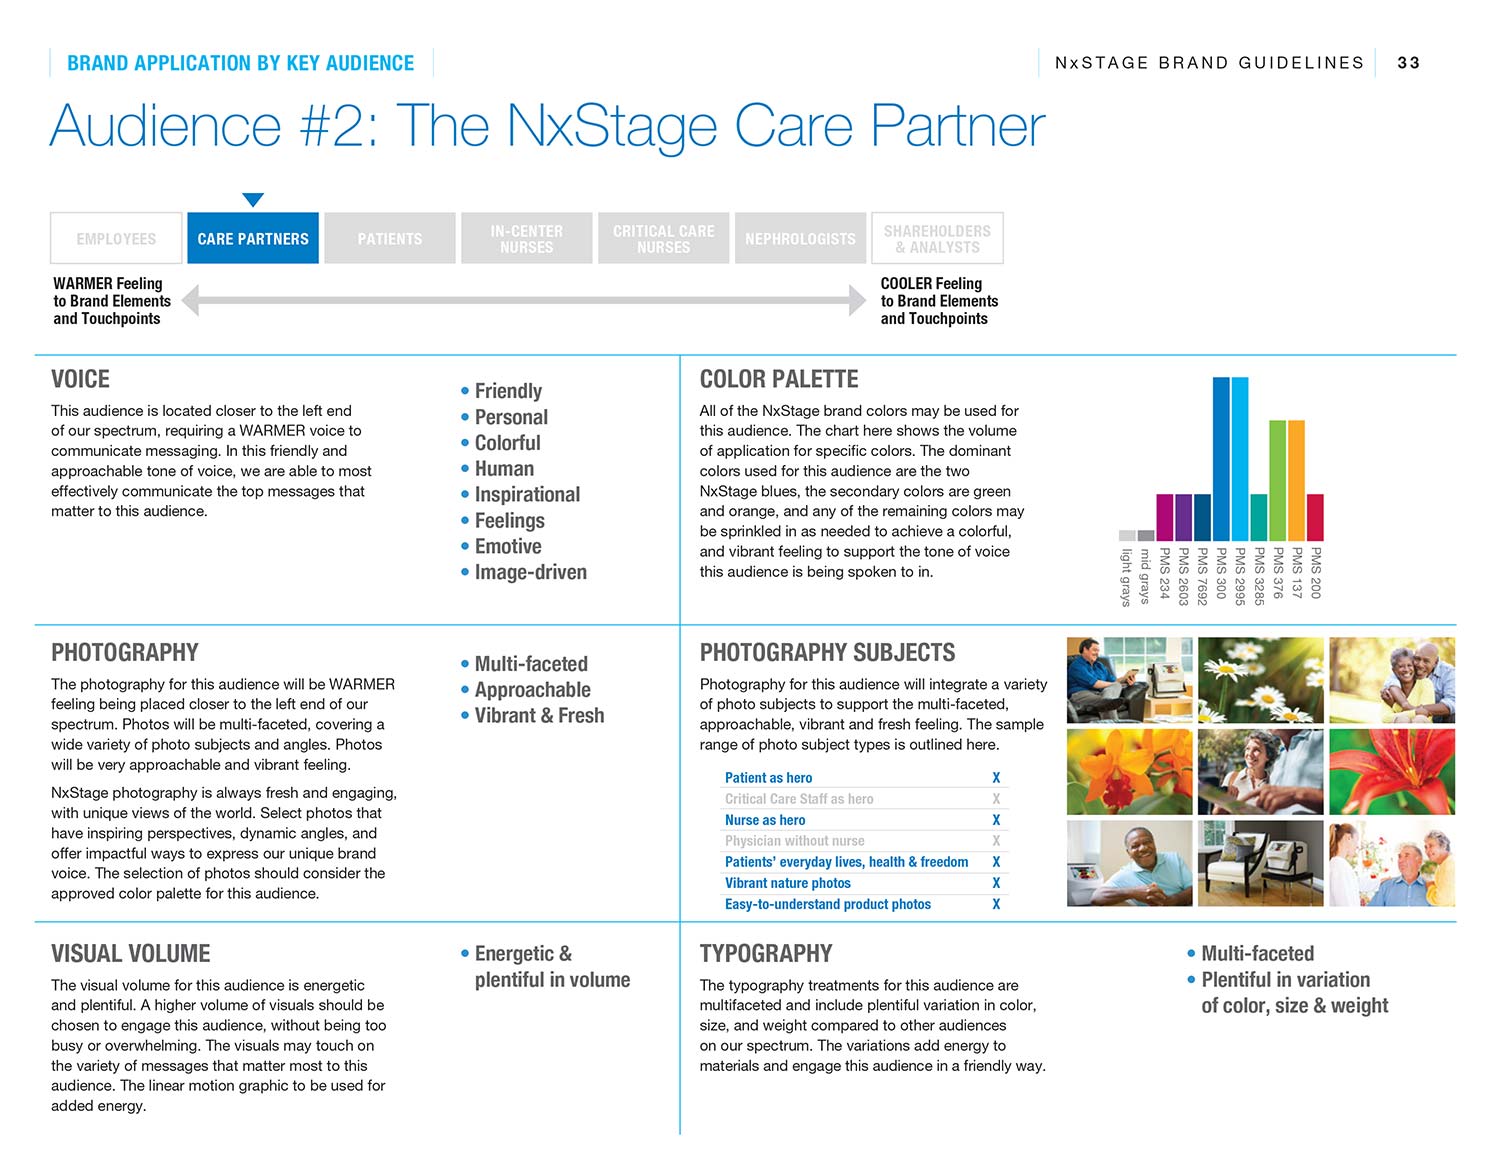 NxStage Brand Guide audience #2: Visuals for The NxStage Care Partner